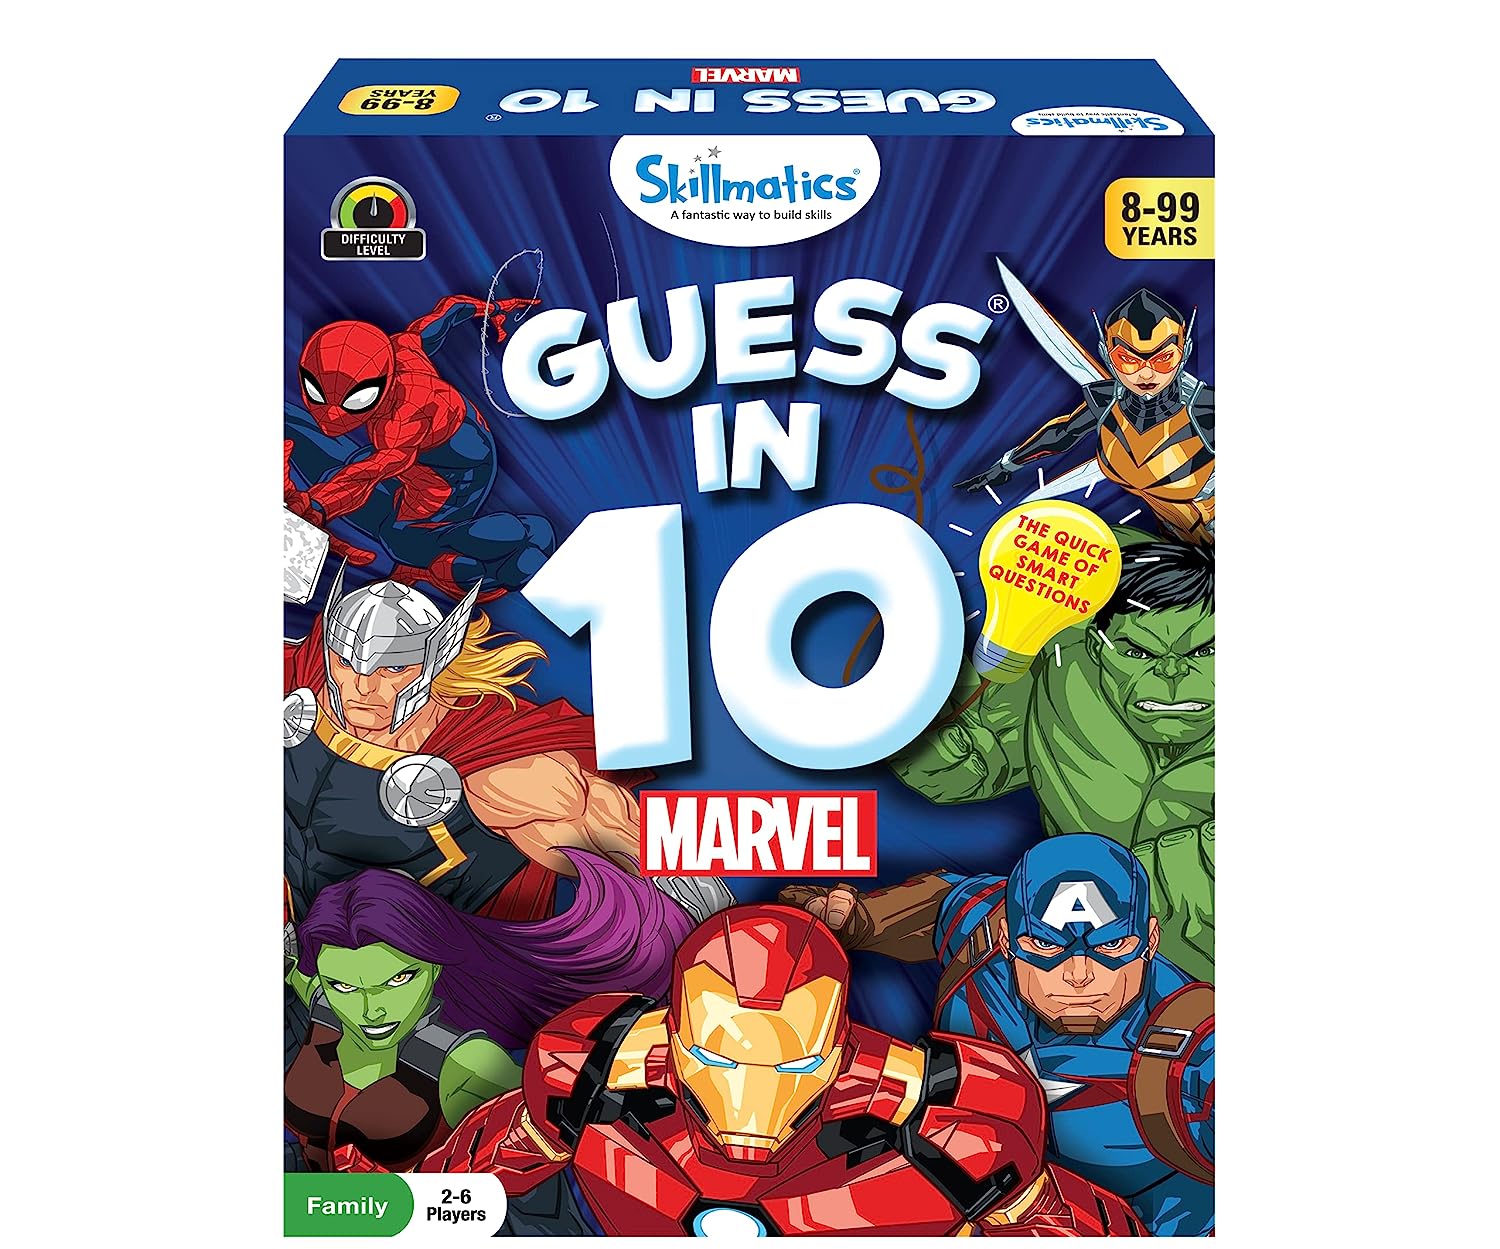 15 Superhero Gift Ideas for Kids | Perfect for Marvel & DC Fans